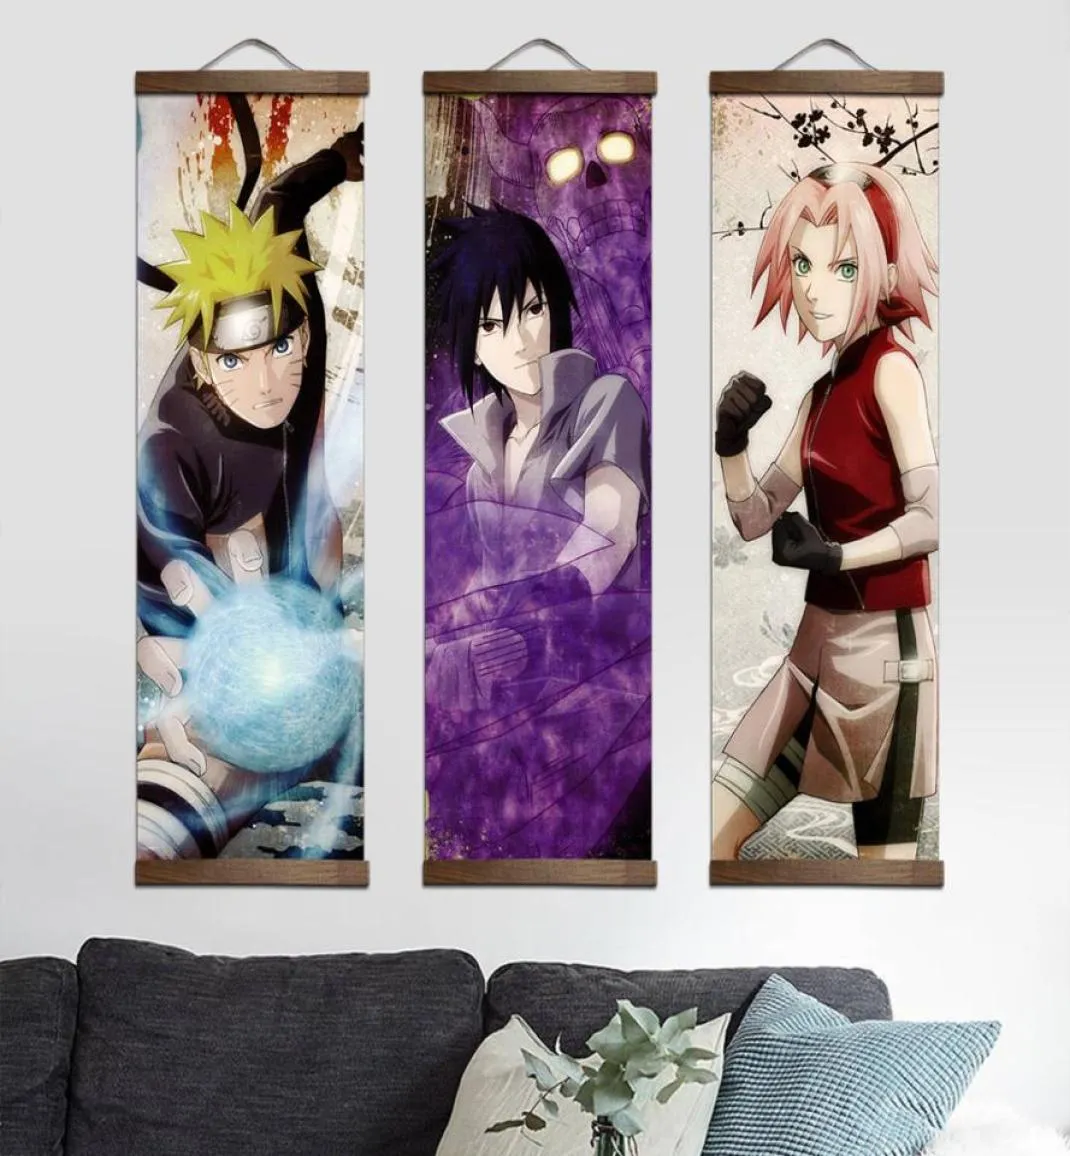 Wholesale Japanese Anime Scroll Painting Kakashi Itachi Uchiha Hanging Wall Art Poster Home Decor Wall Pictures For Living Room3386947